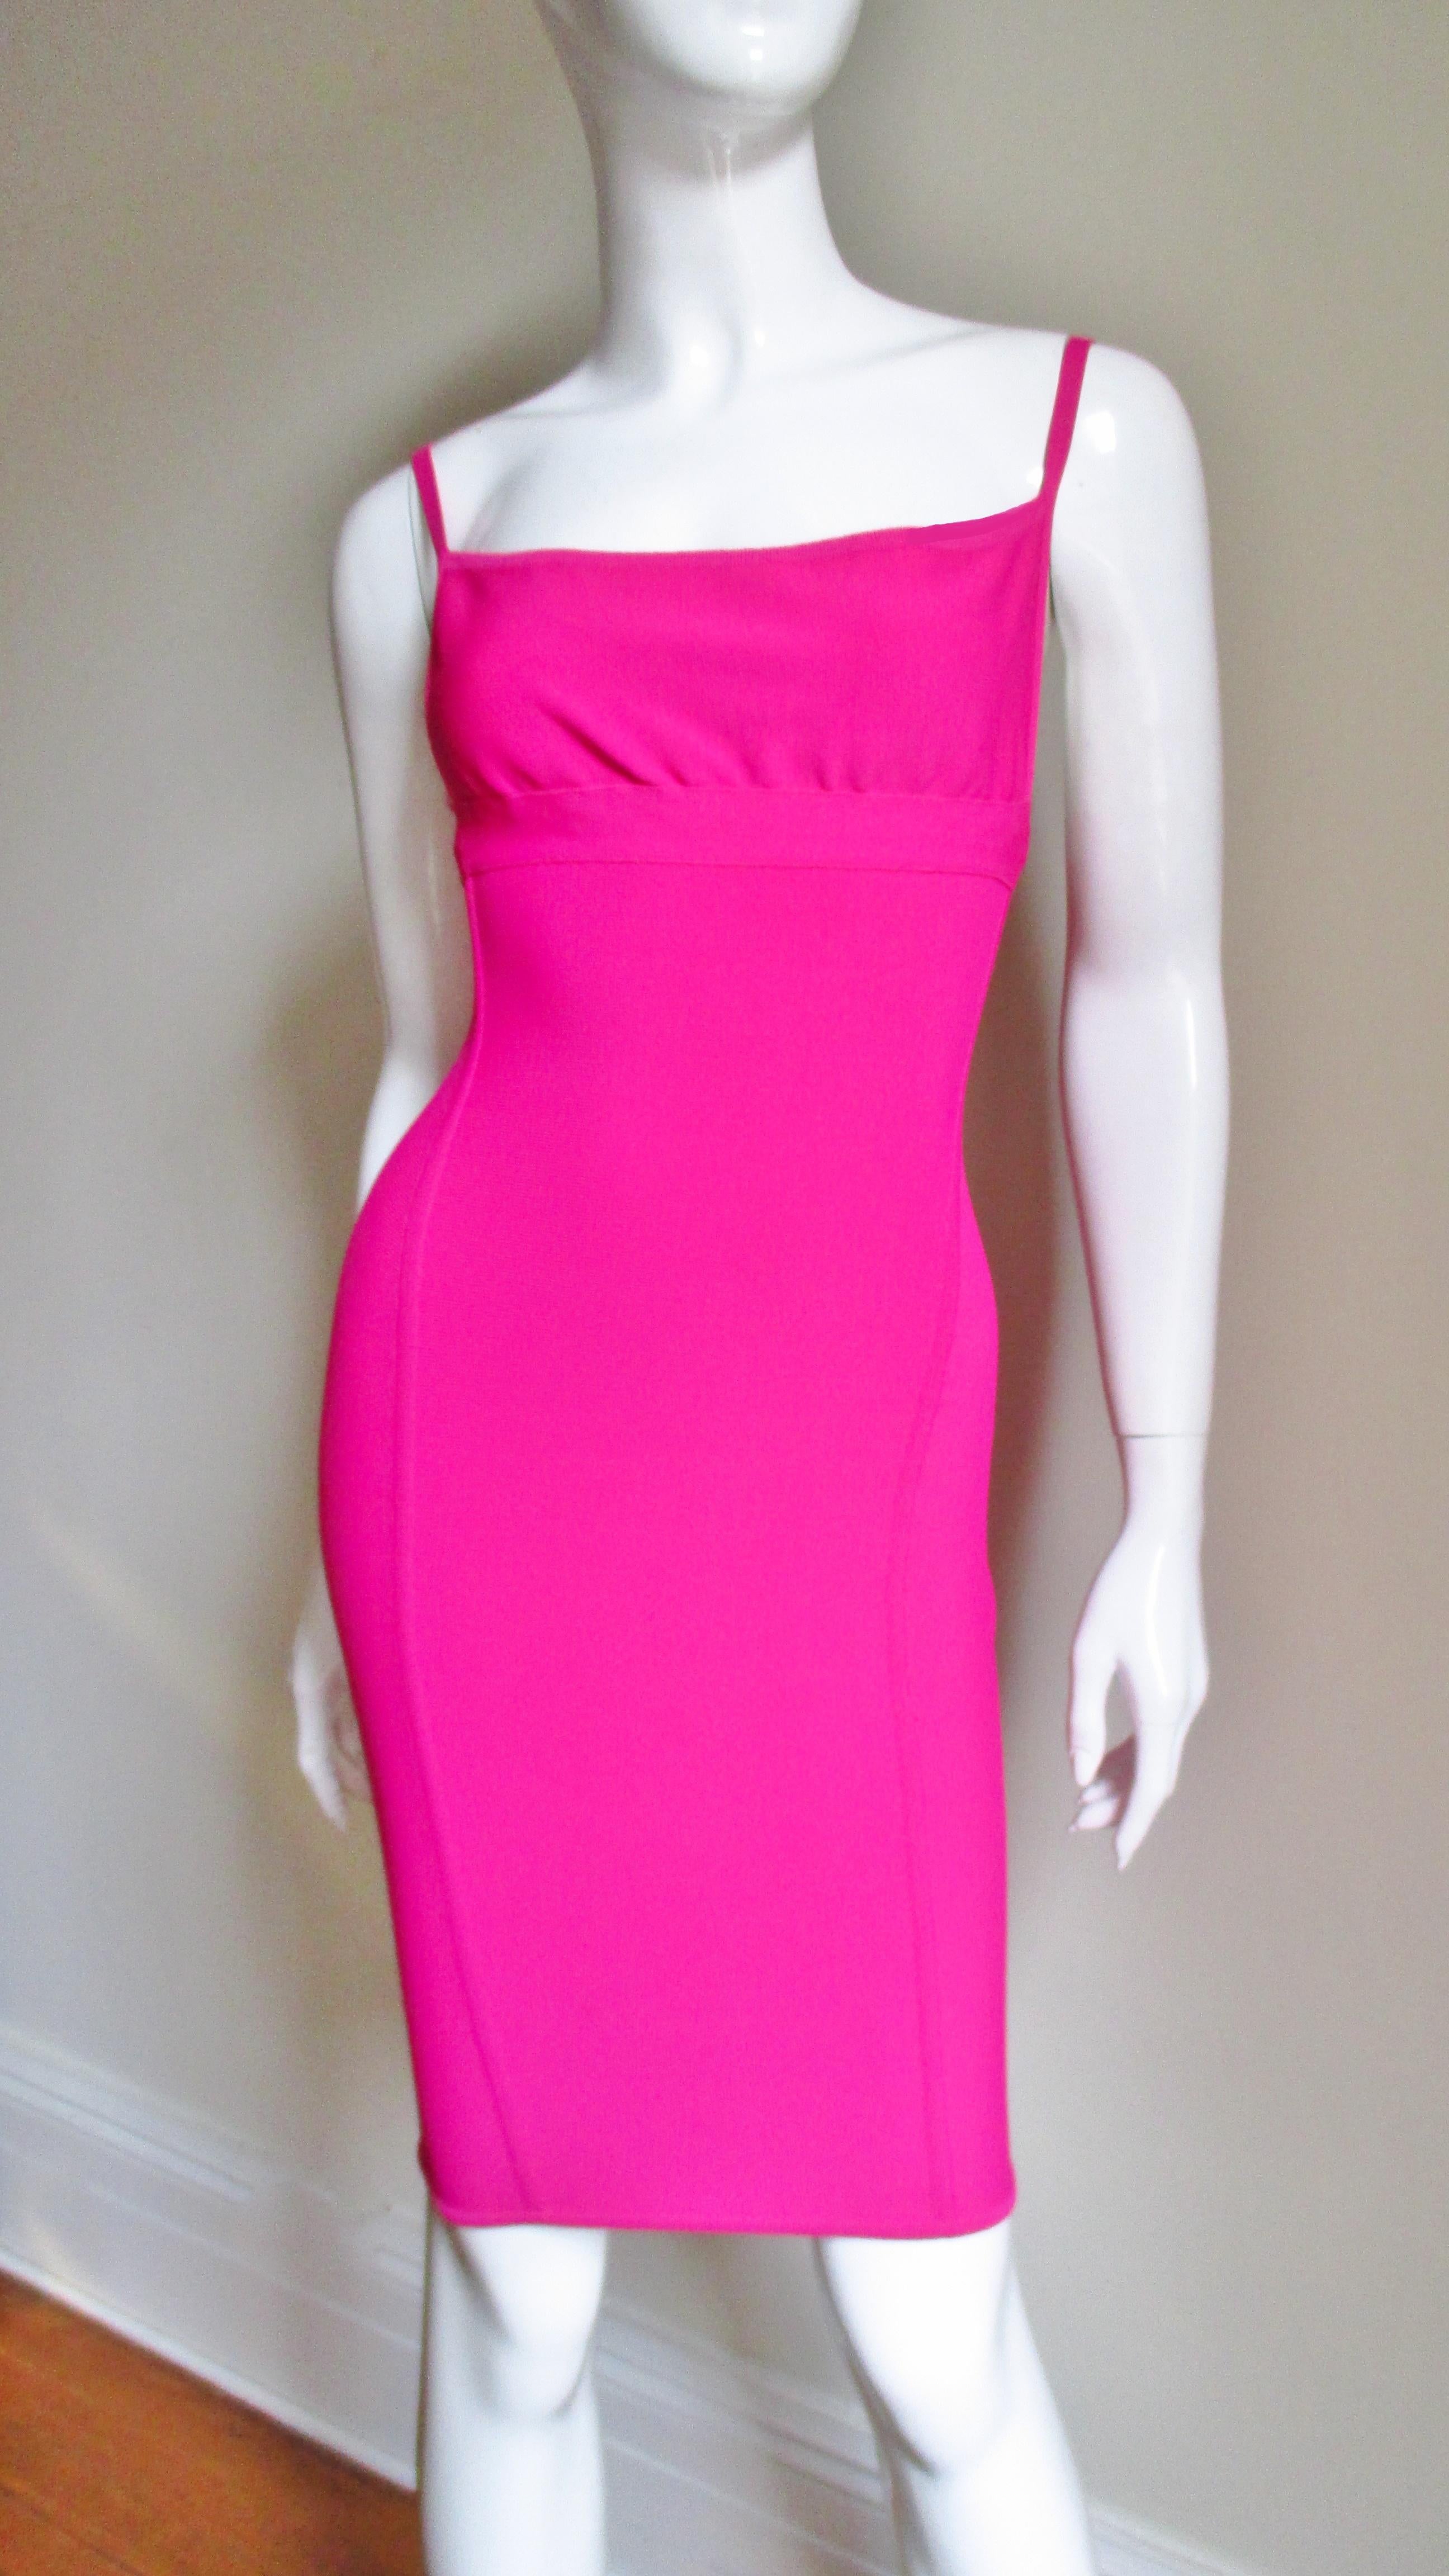 A beautiful bight pink fitted dress from master designer Herve Leger in his signature stretch fabric.  The dress has spaghetti straps and the body conscious fit he is famous for. It is unlined and has a matching back invisible zipper. 
Fits size